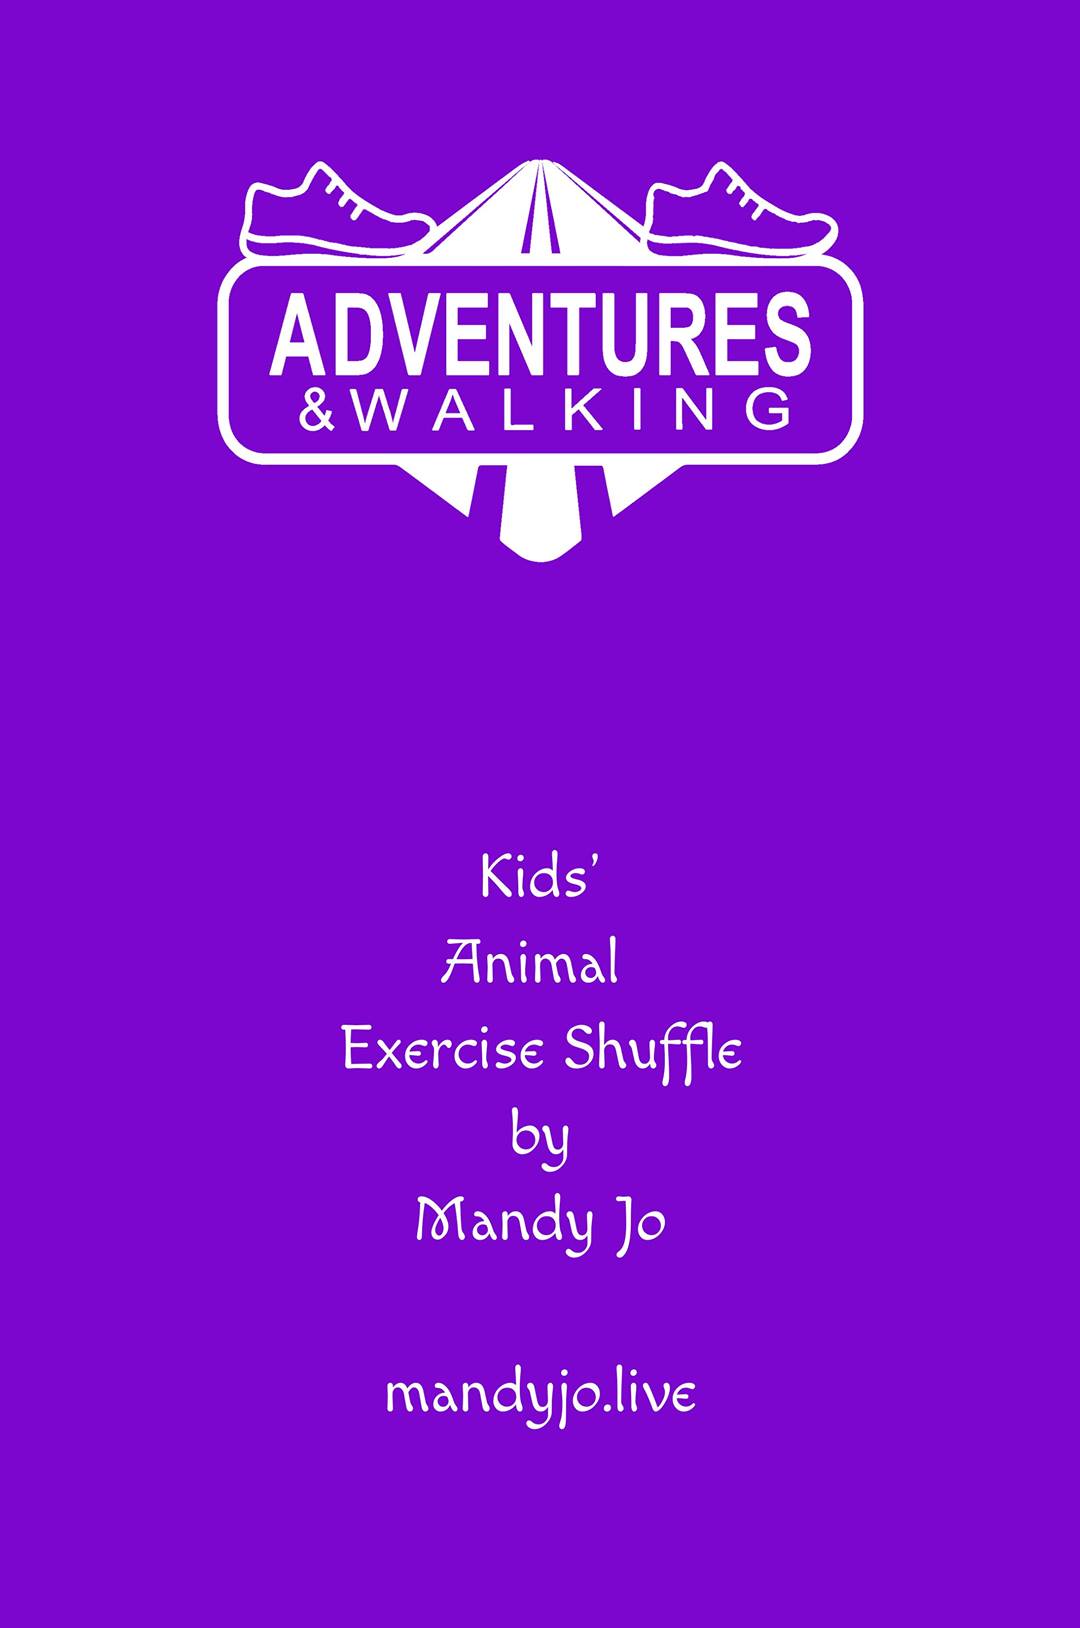 Kids Animal Exercise Cards Now Available!